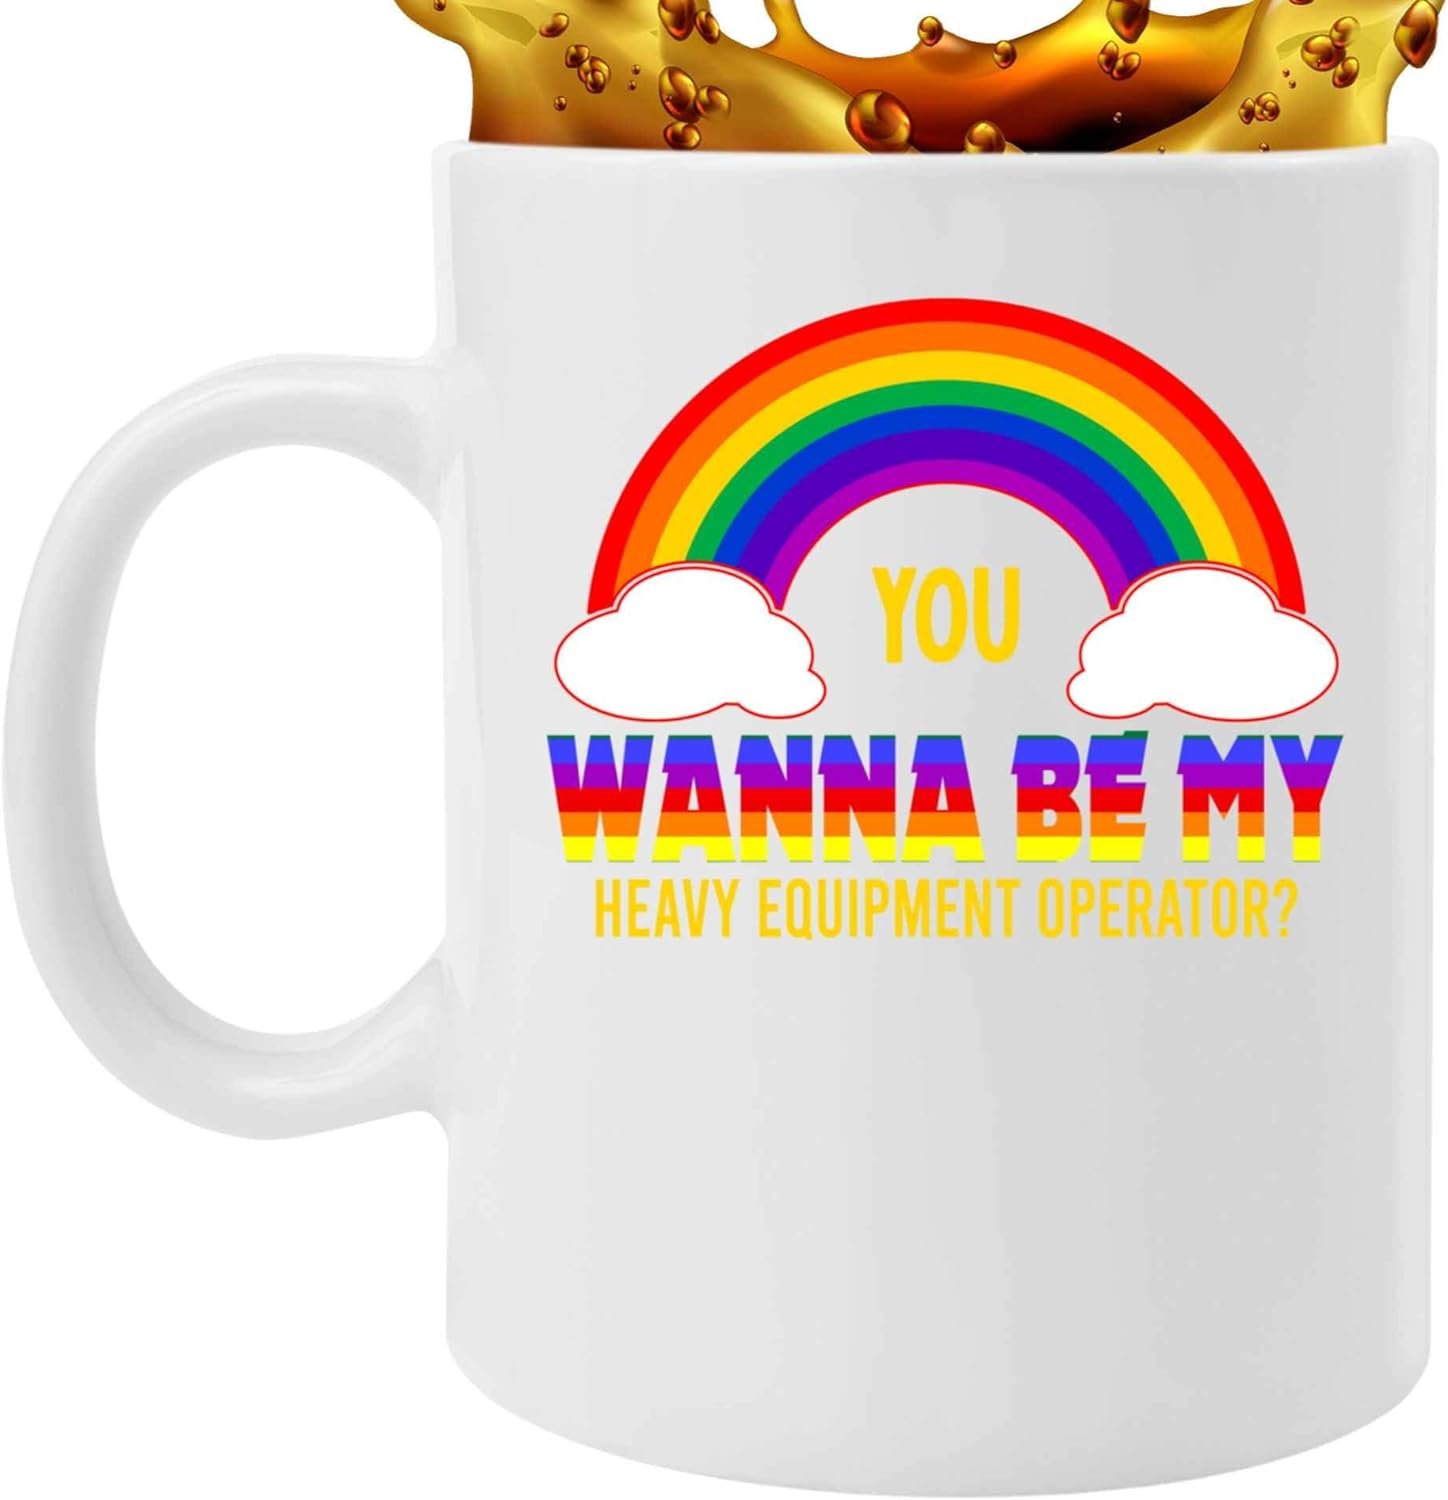 funny gift for heavy equipment operators perfect for cousins birthday you wanna be my heavy equipment operator humorous